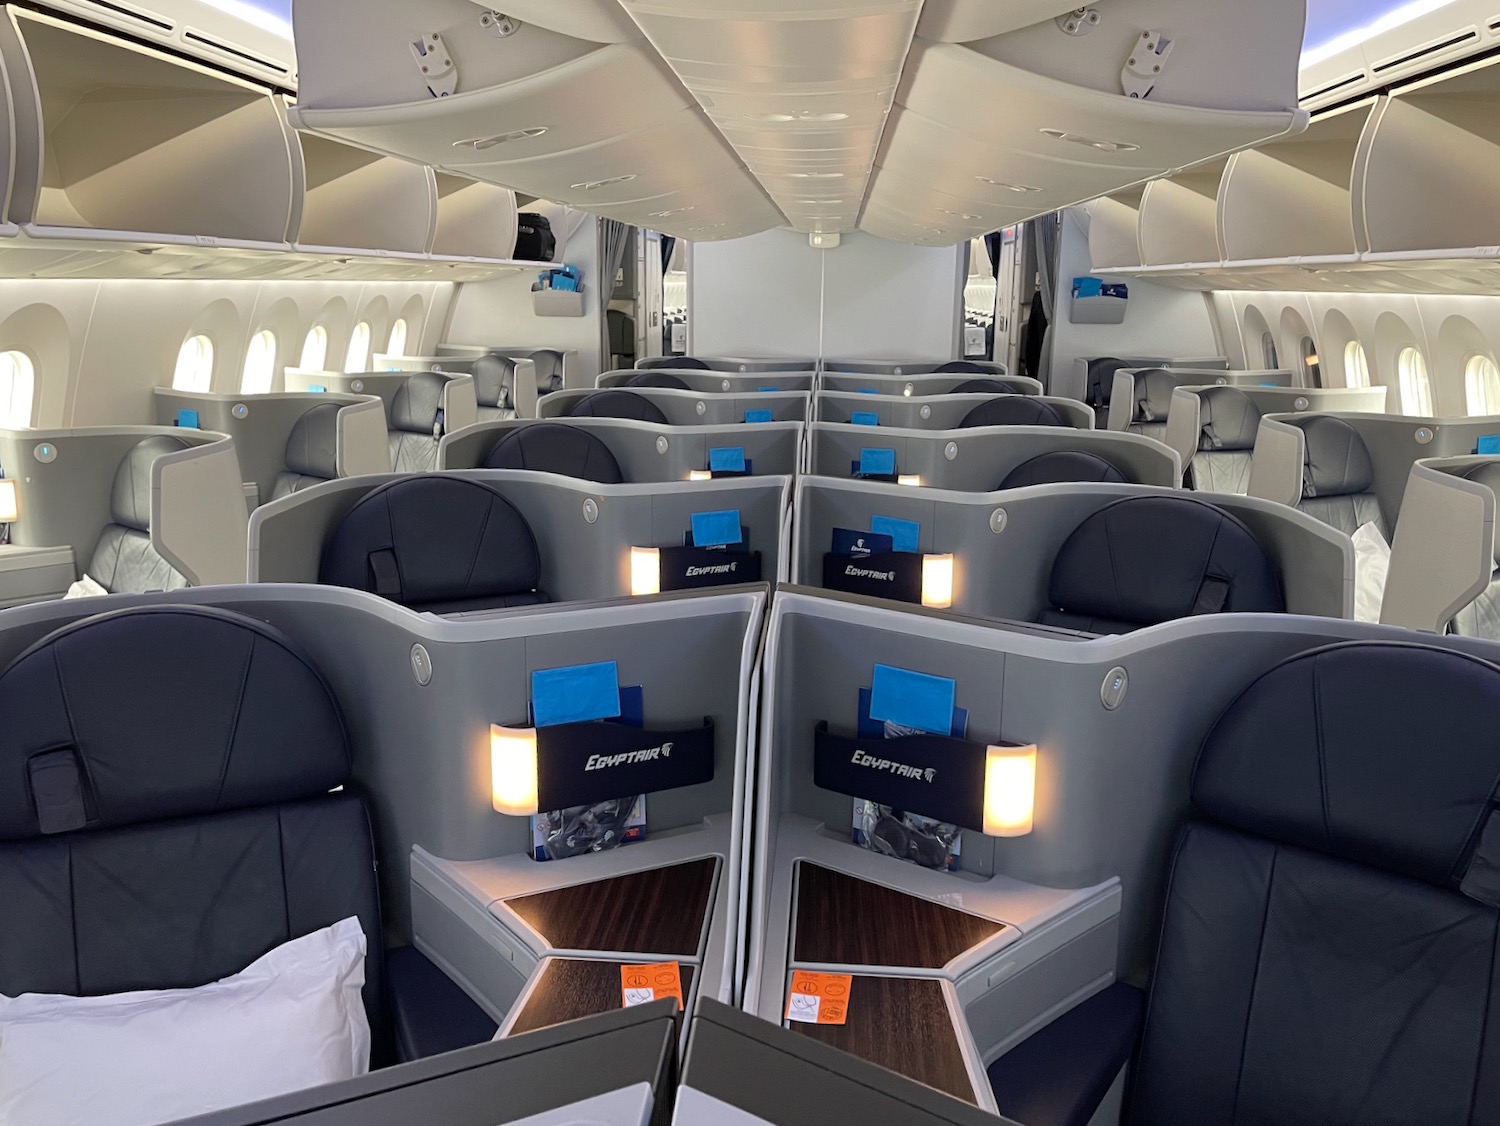 Review EgyptAir 7879 Business Class Live and Let's Fly